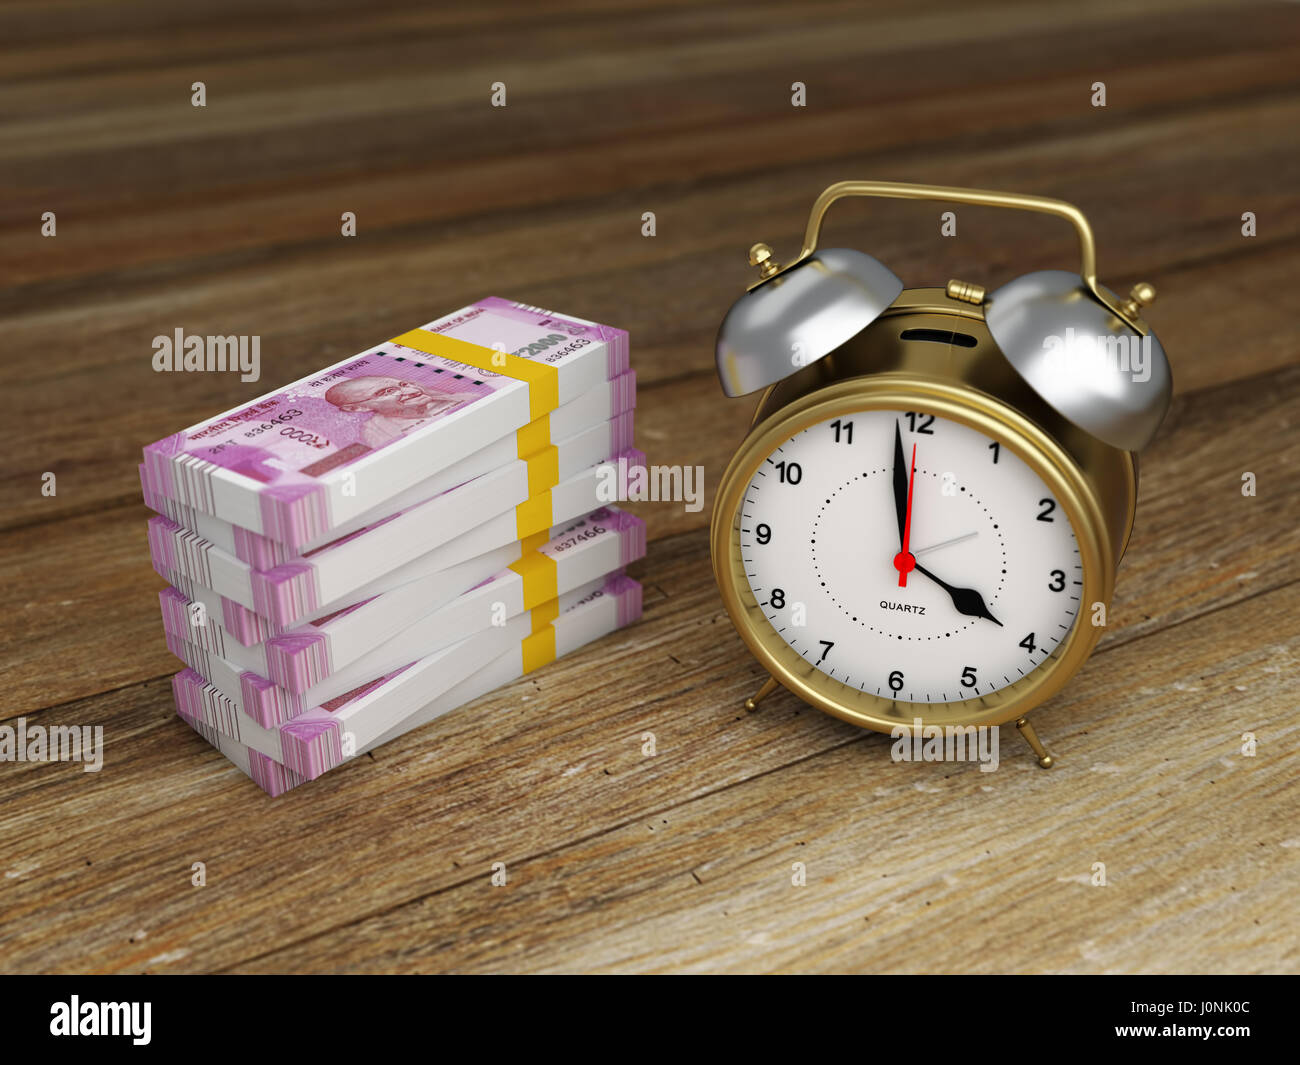 Alarm clock with Indian Rupee - 3D Rendering Image Stock Photo